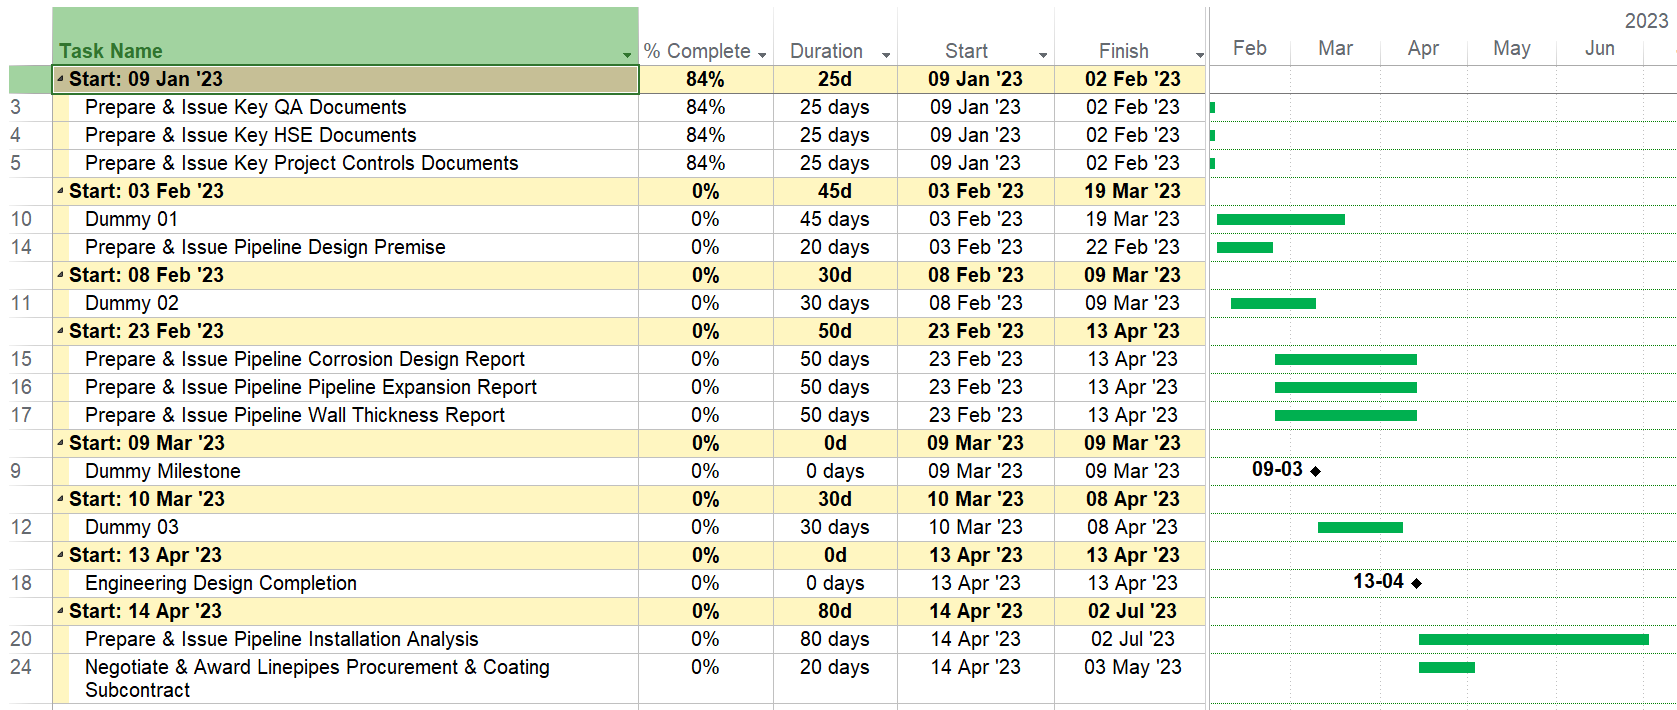 Microsoft Project Lookahead Schedule: Group Tasks by Dates